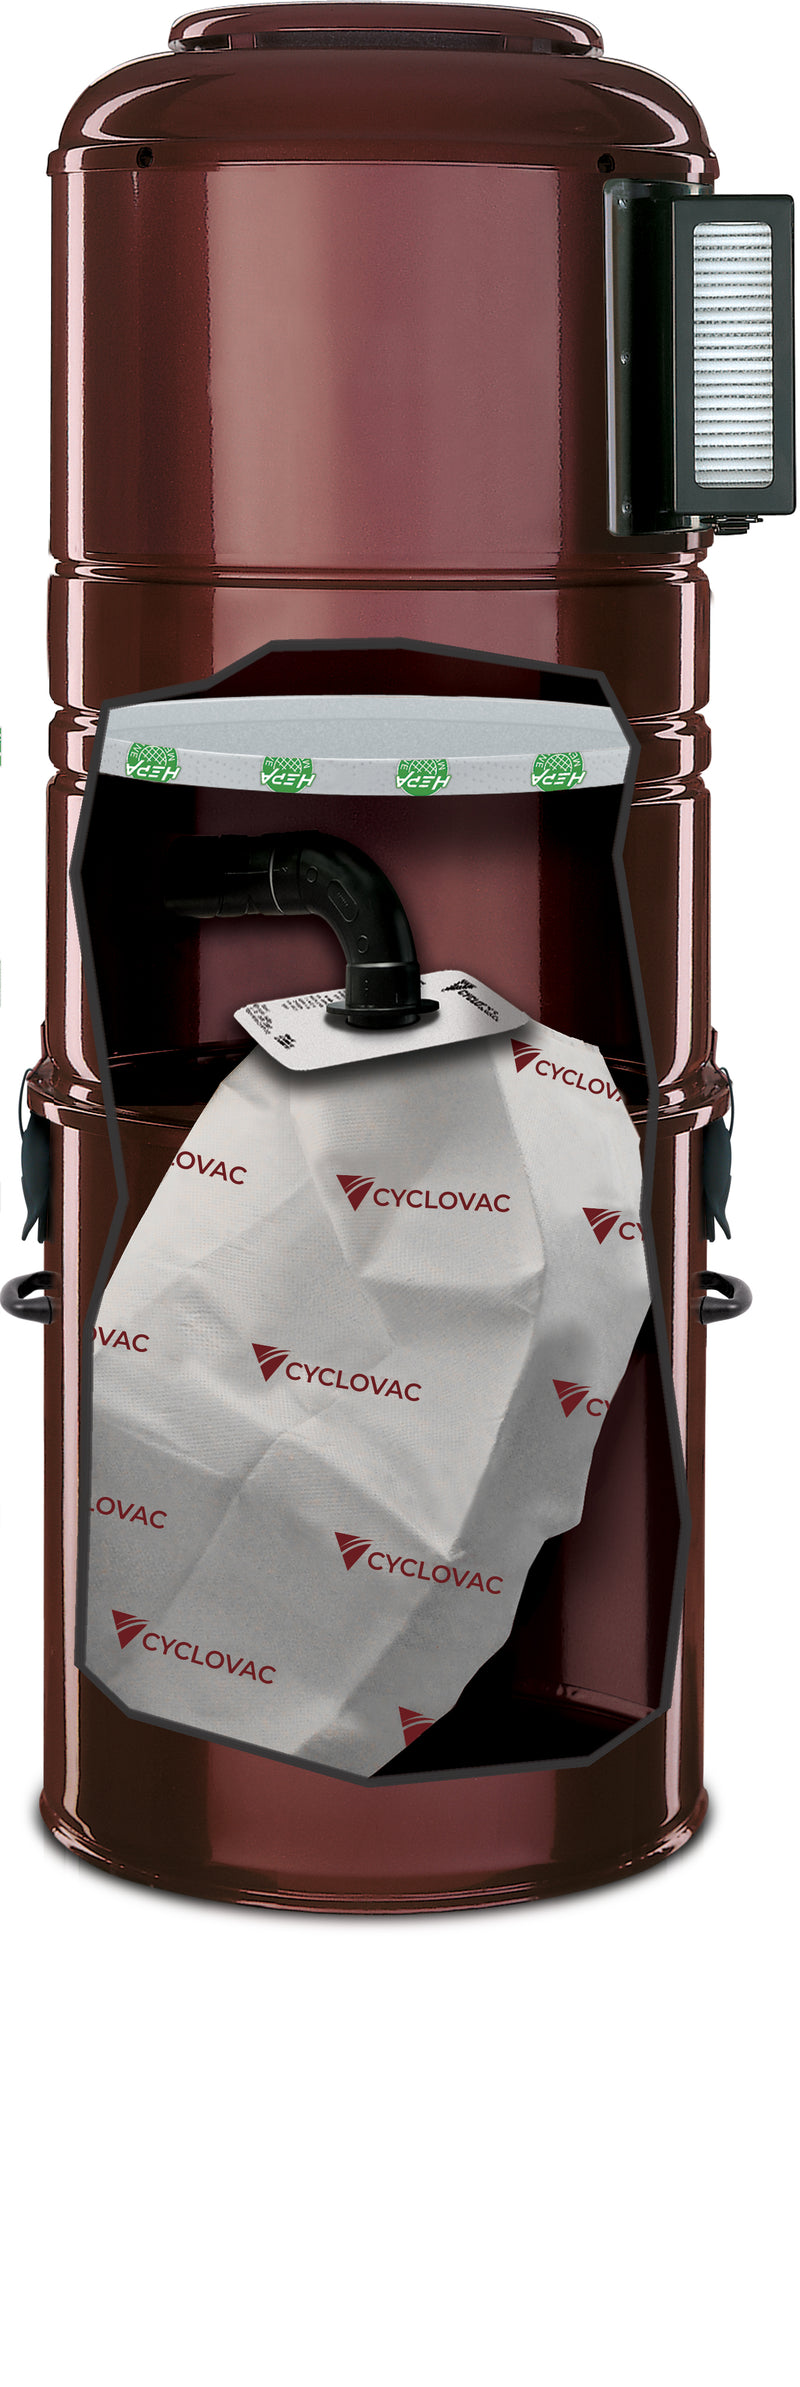 Cyclovac H615 Canister - Hybrid - Up to 5000 Sq Ft - Super Vacs Vacuums